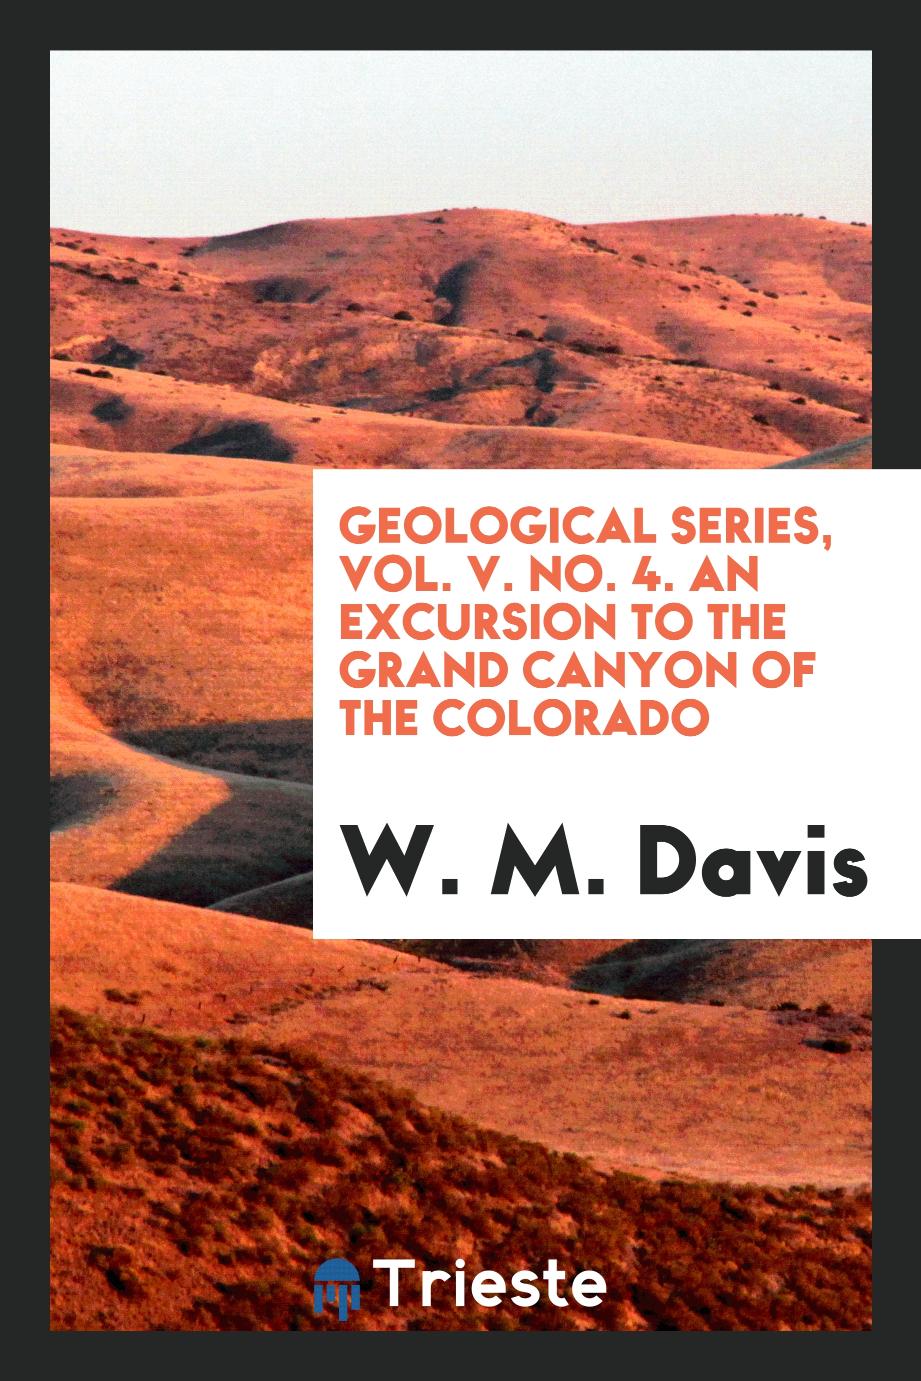 Geological Series, Vol. V. No. 4. An Excursion to the Grand Canyon of the Colorado